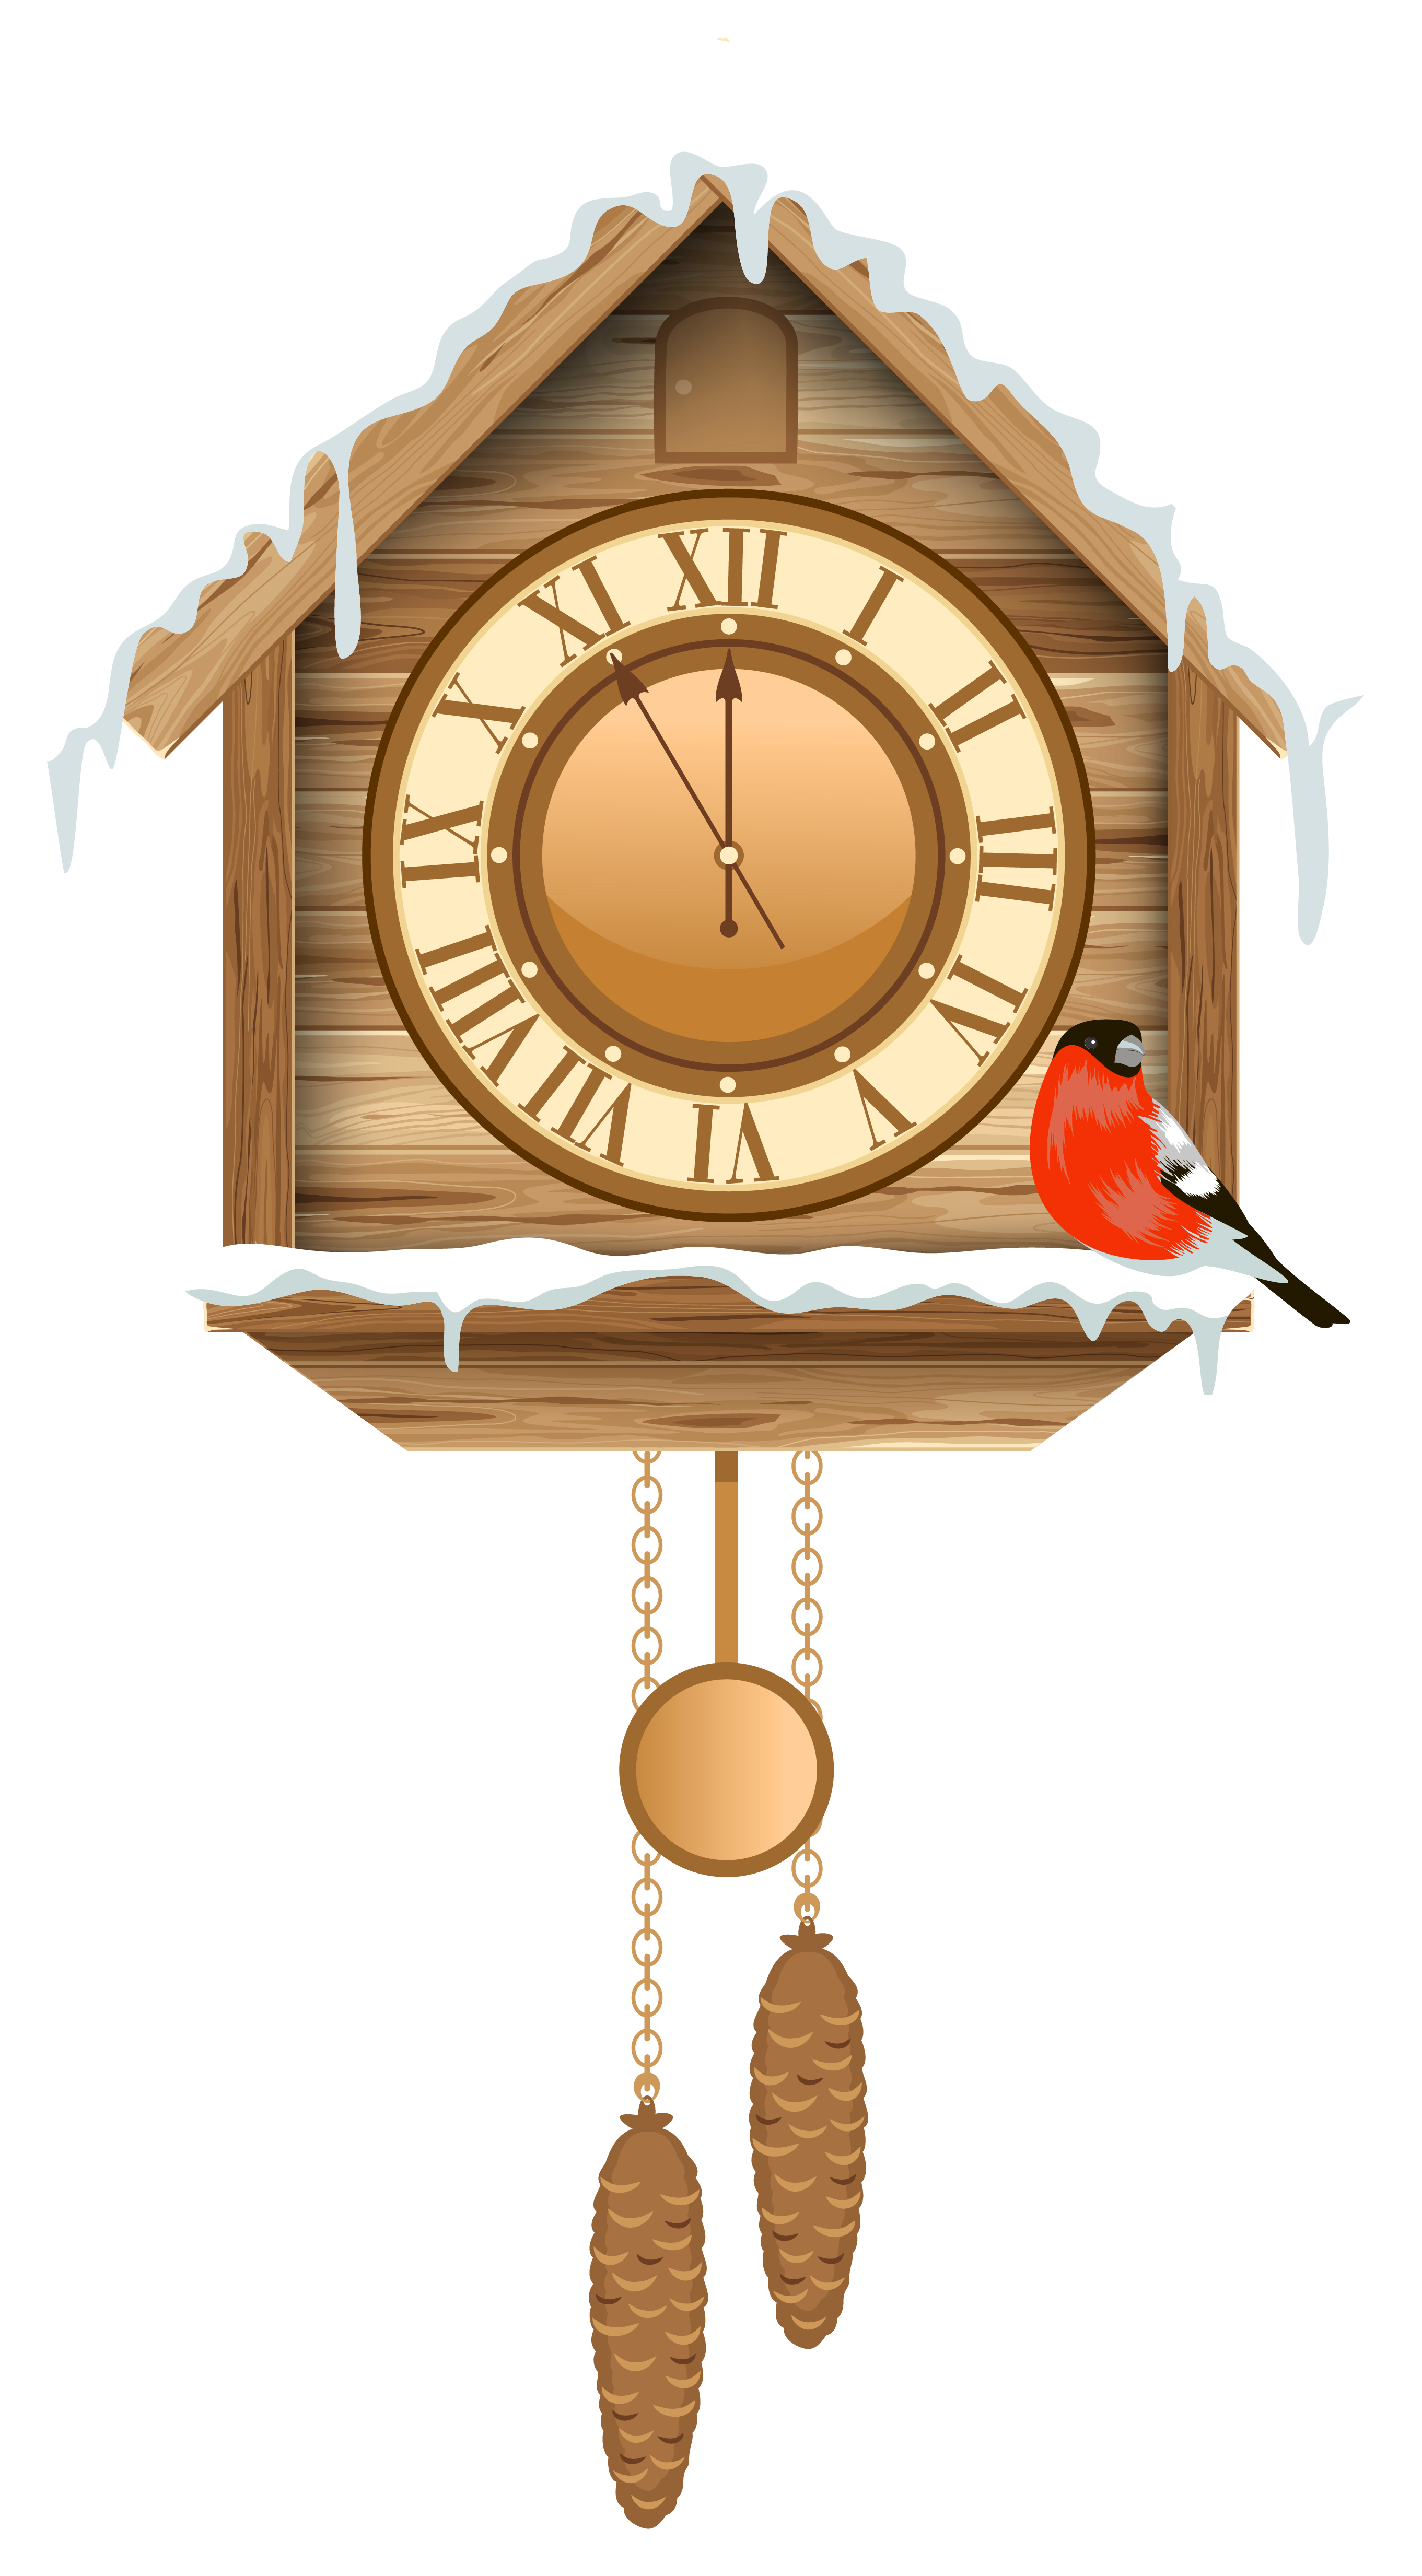 Christmas Cuckoo Clock with Snow PNG Clipart | Gallery ...
